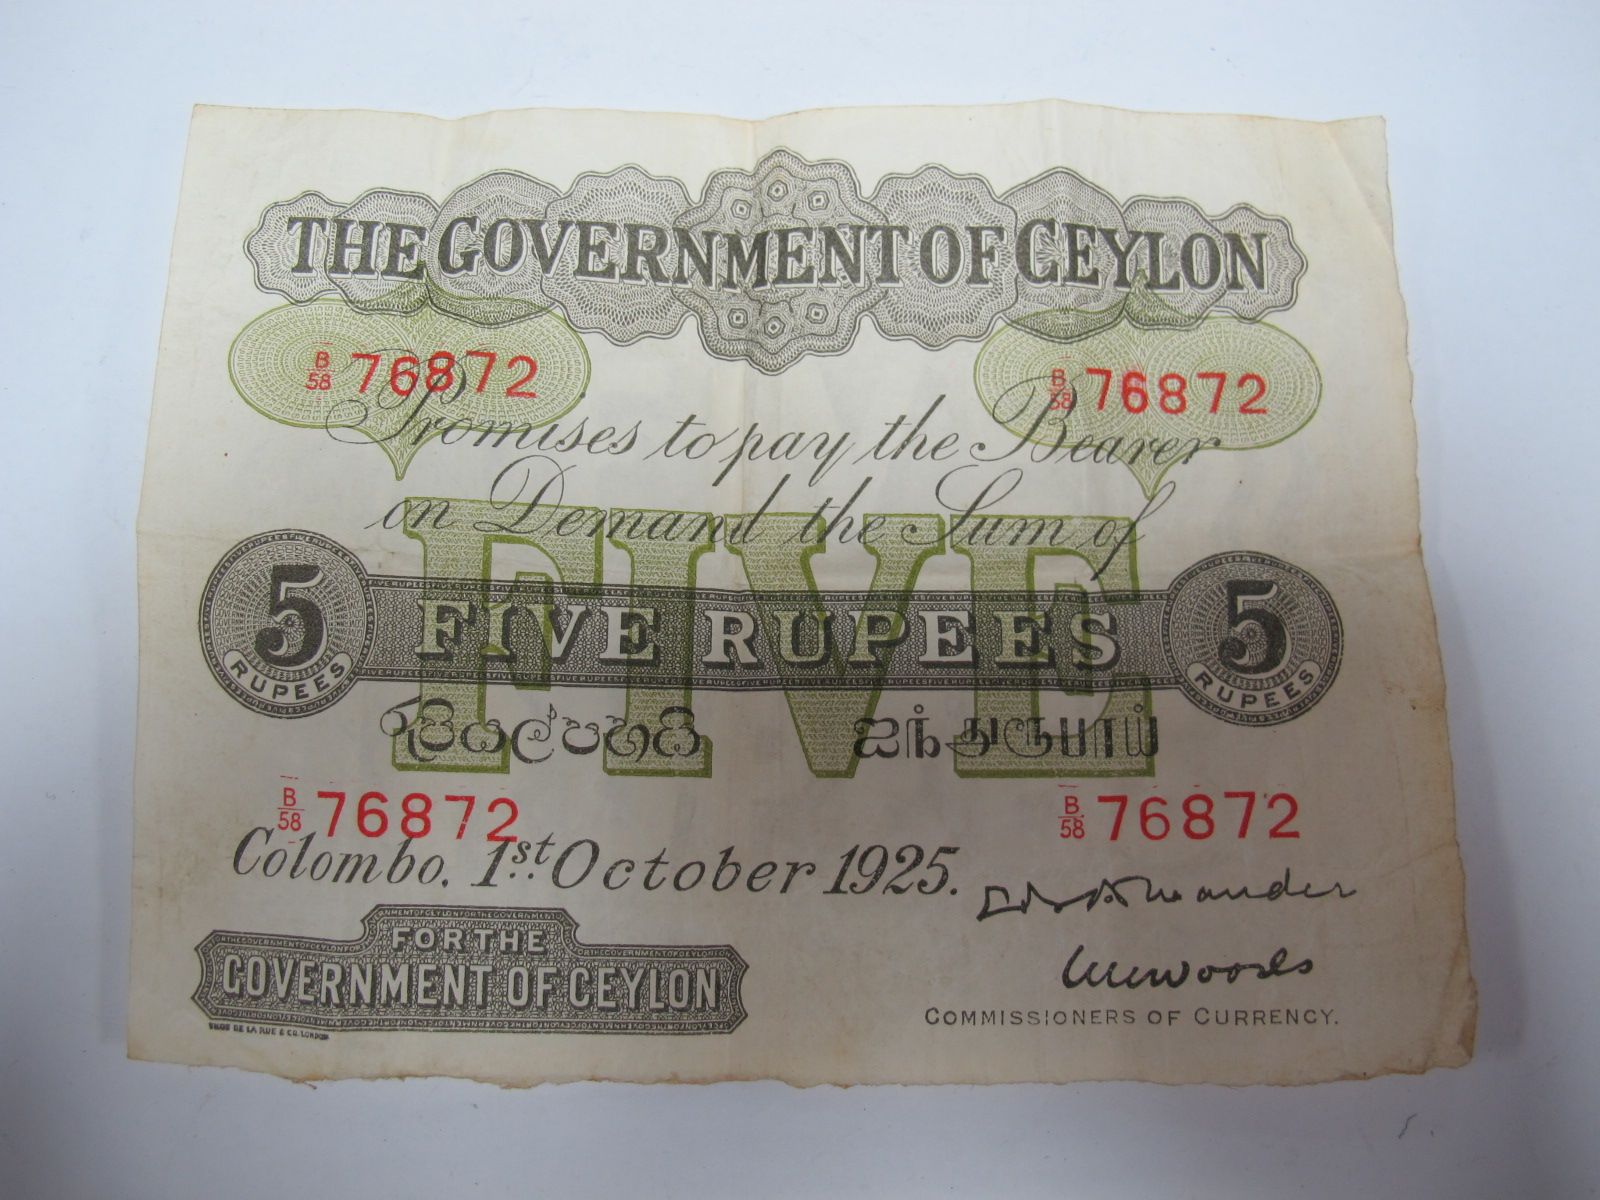 A Government of Ceylon Five Rupee Banknote, Colombo, 1st October 1925. Number B58 76872. Much folded